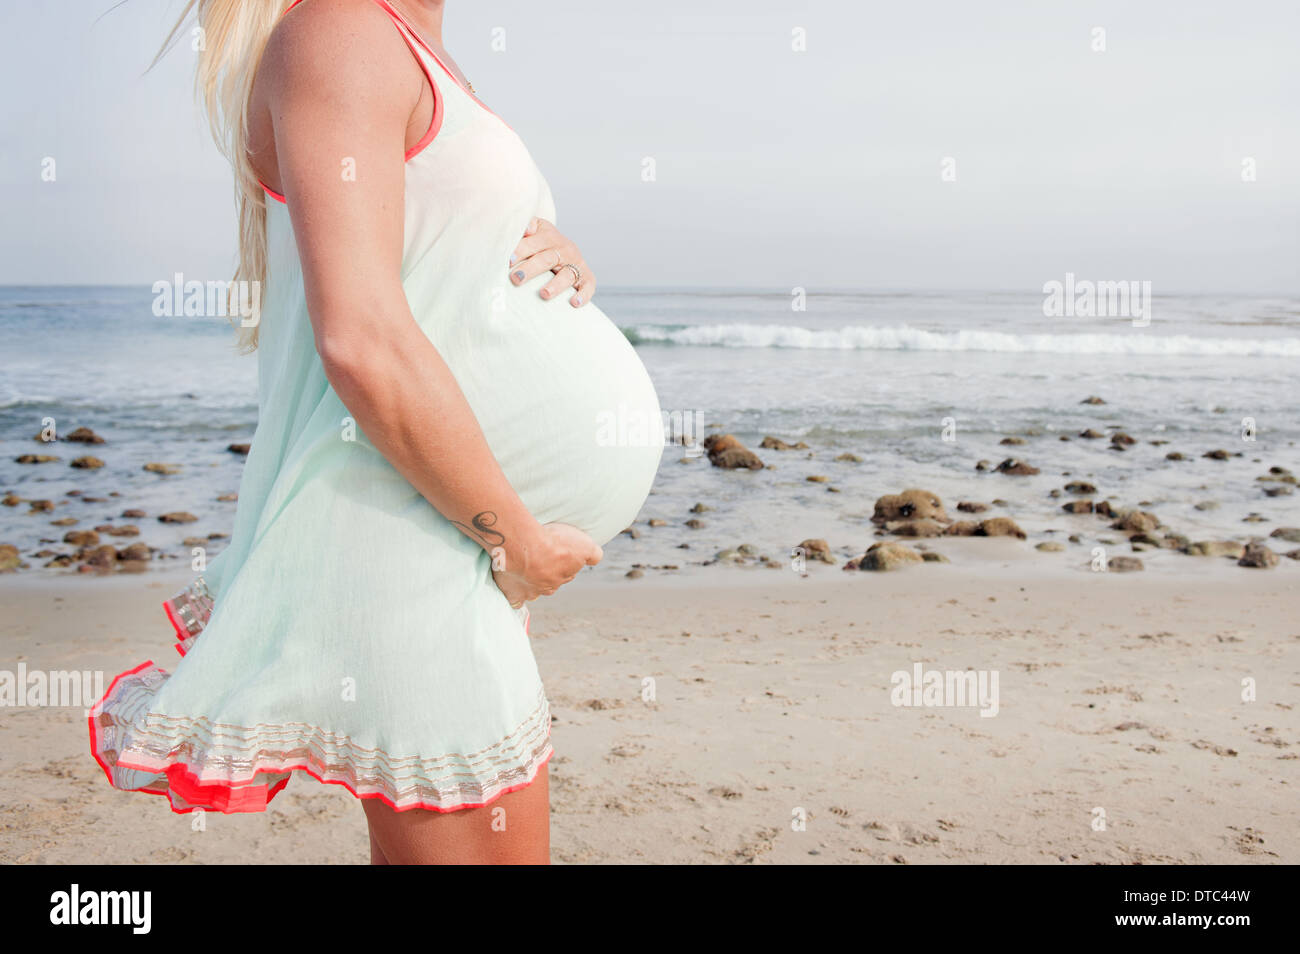 Portrait of pregnant young woman on beach Banque D'Images